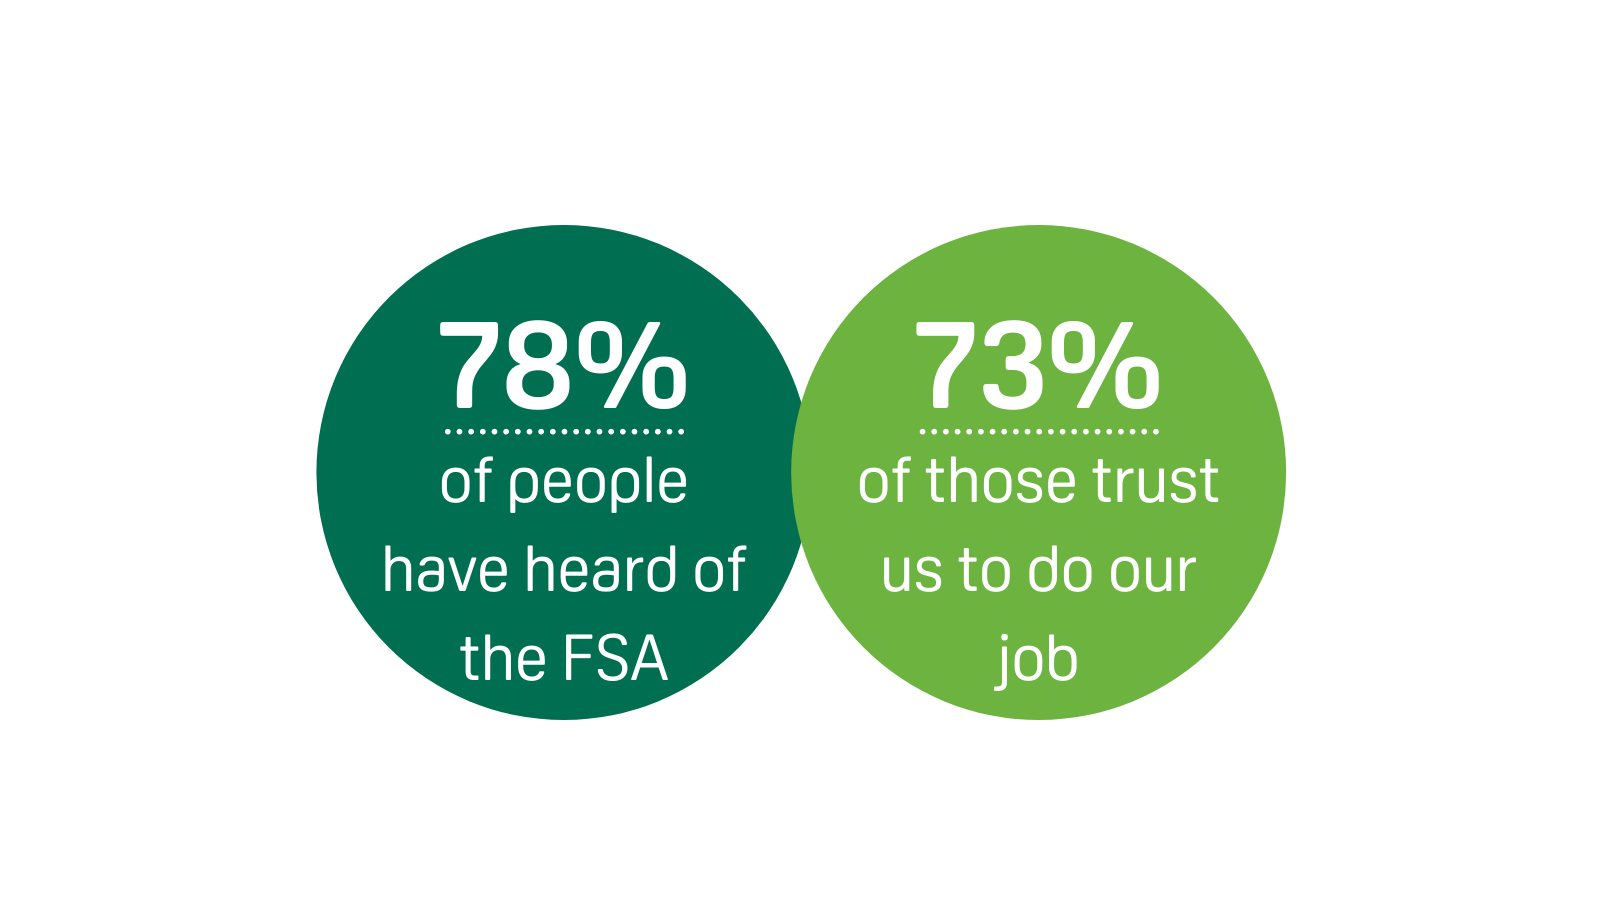 78% of people have heard of the FSA. Of those, 73% trust us to do our job.